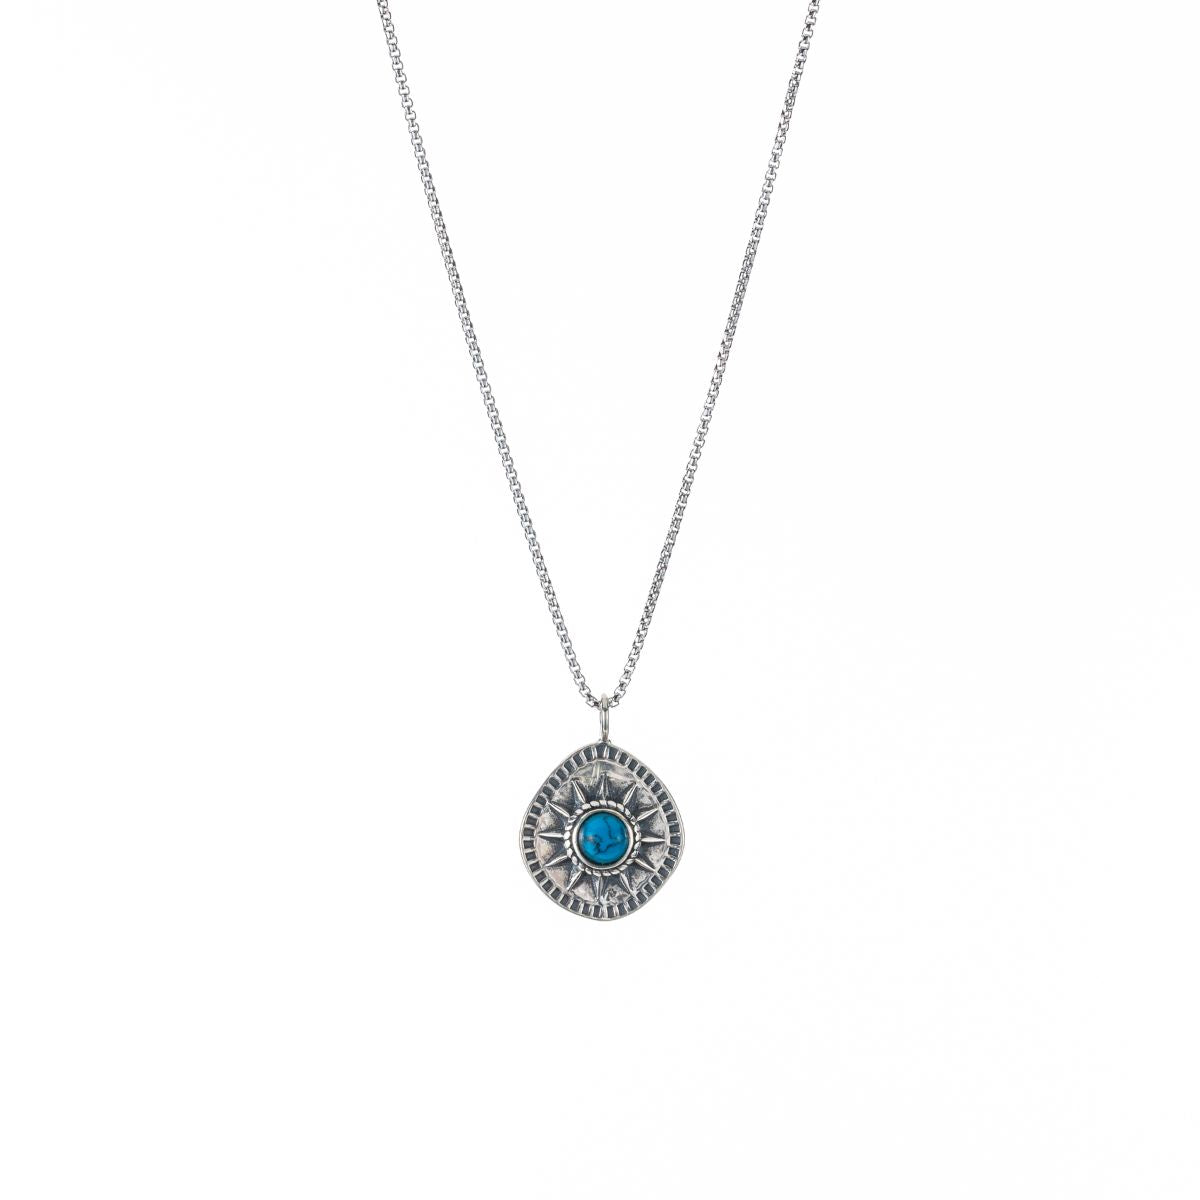 Sun Pendant Necklace with Turquoise Stone in Silver